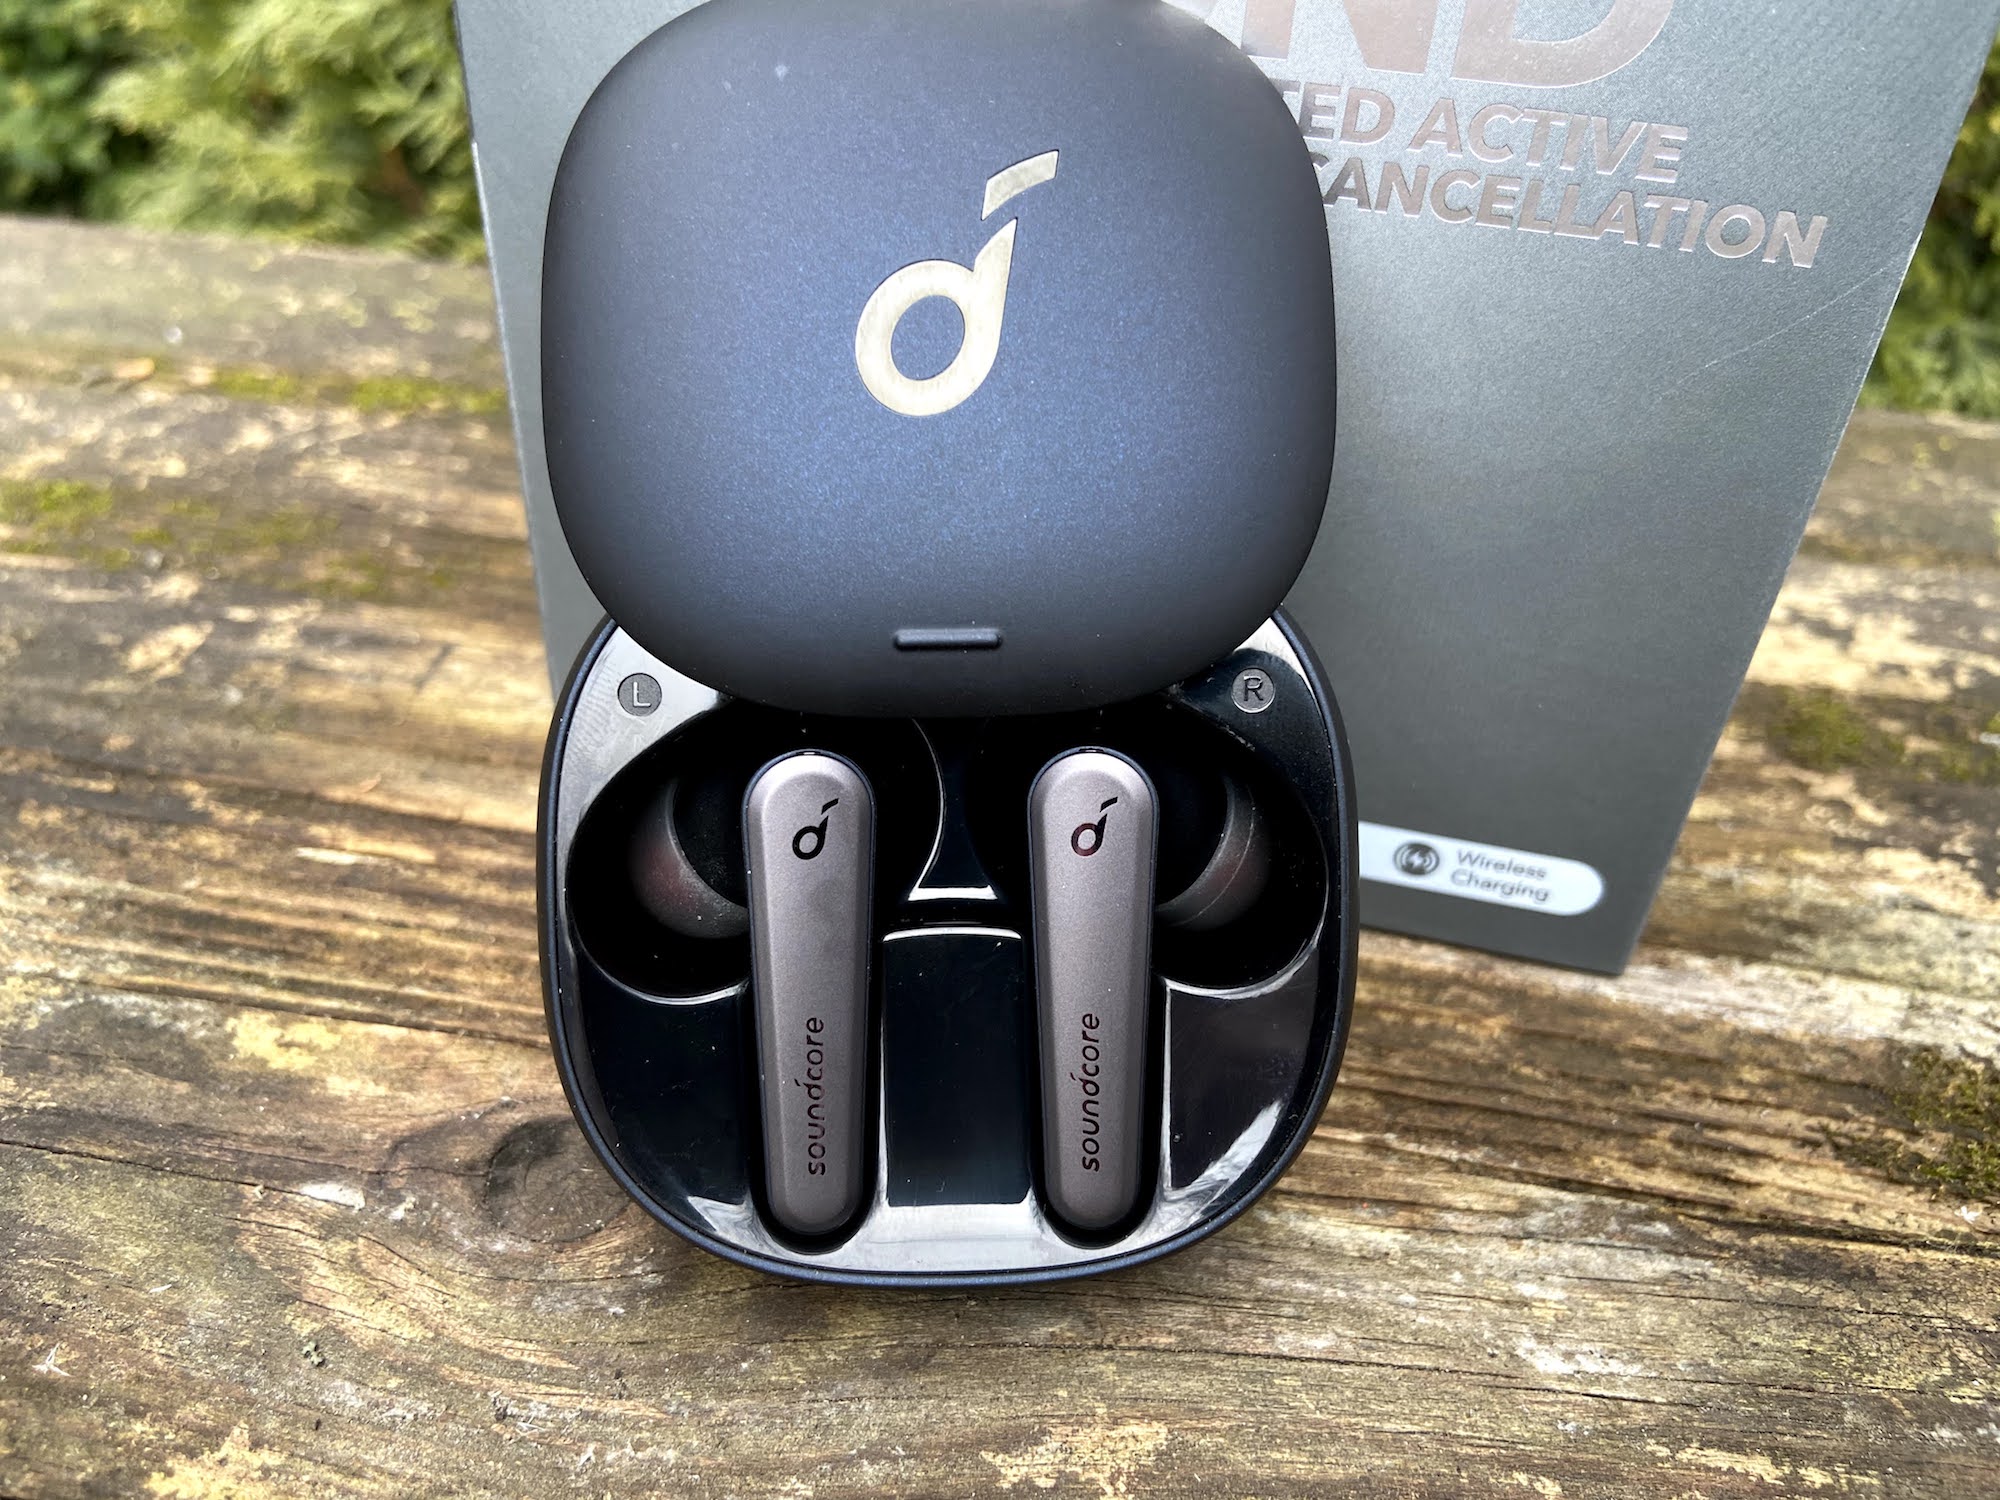 Soundcore Liberty Air 2 Pro review: cut-price noise-cancelling